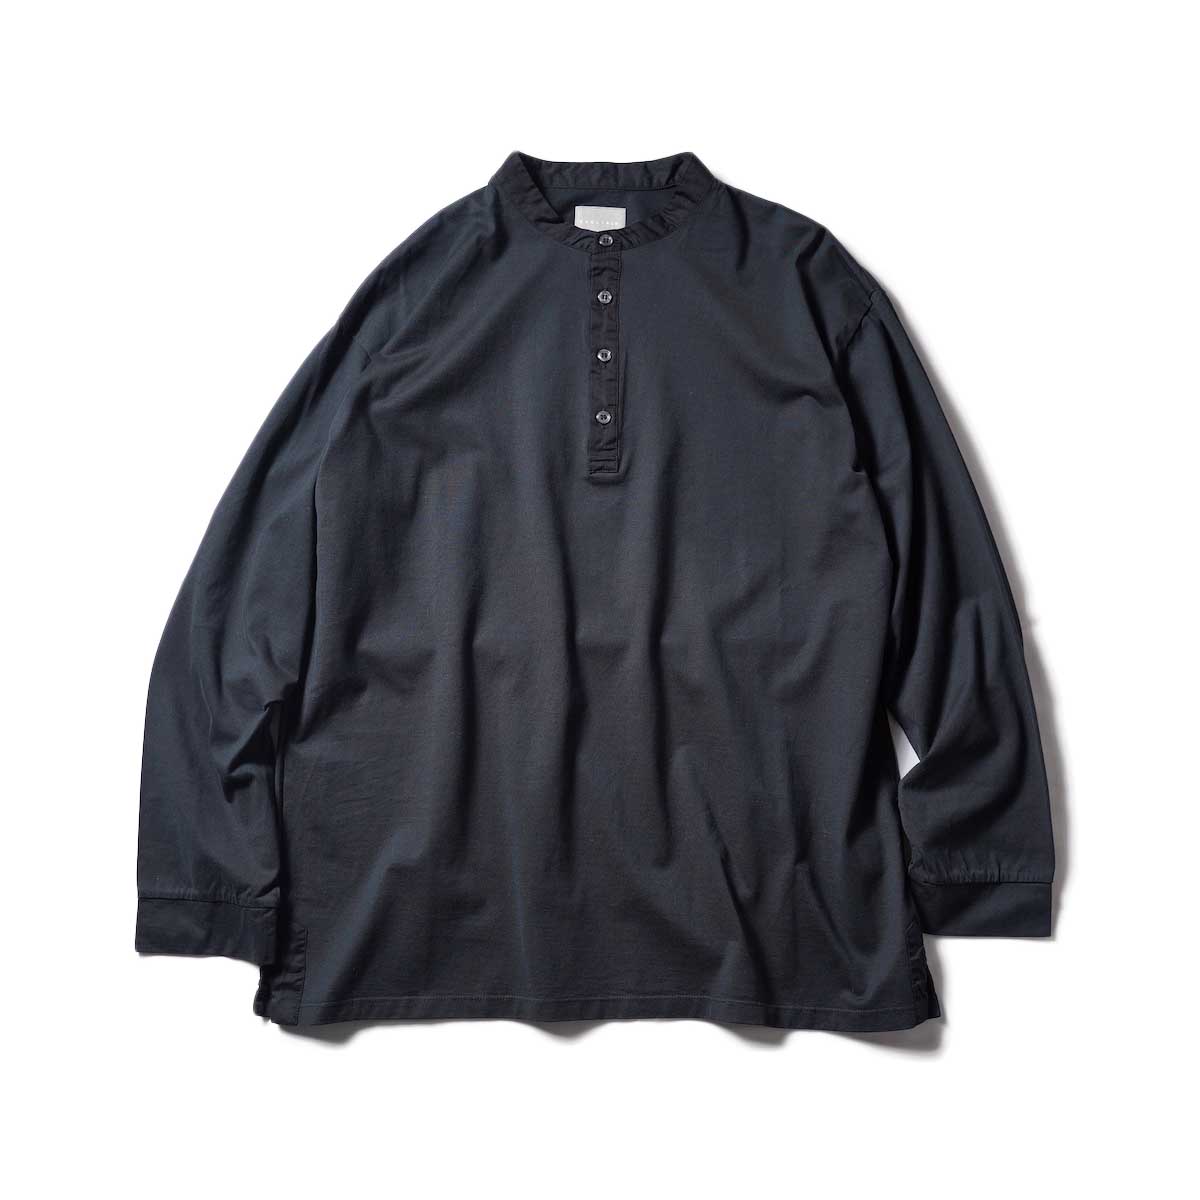 CURLY / BAND COLLAR L/S TEE (Black)